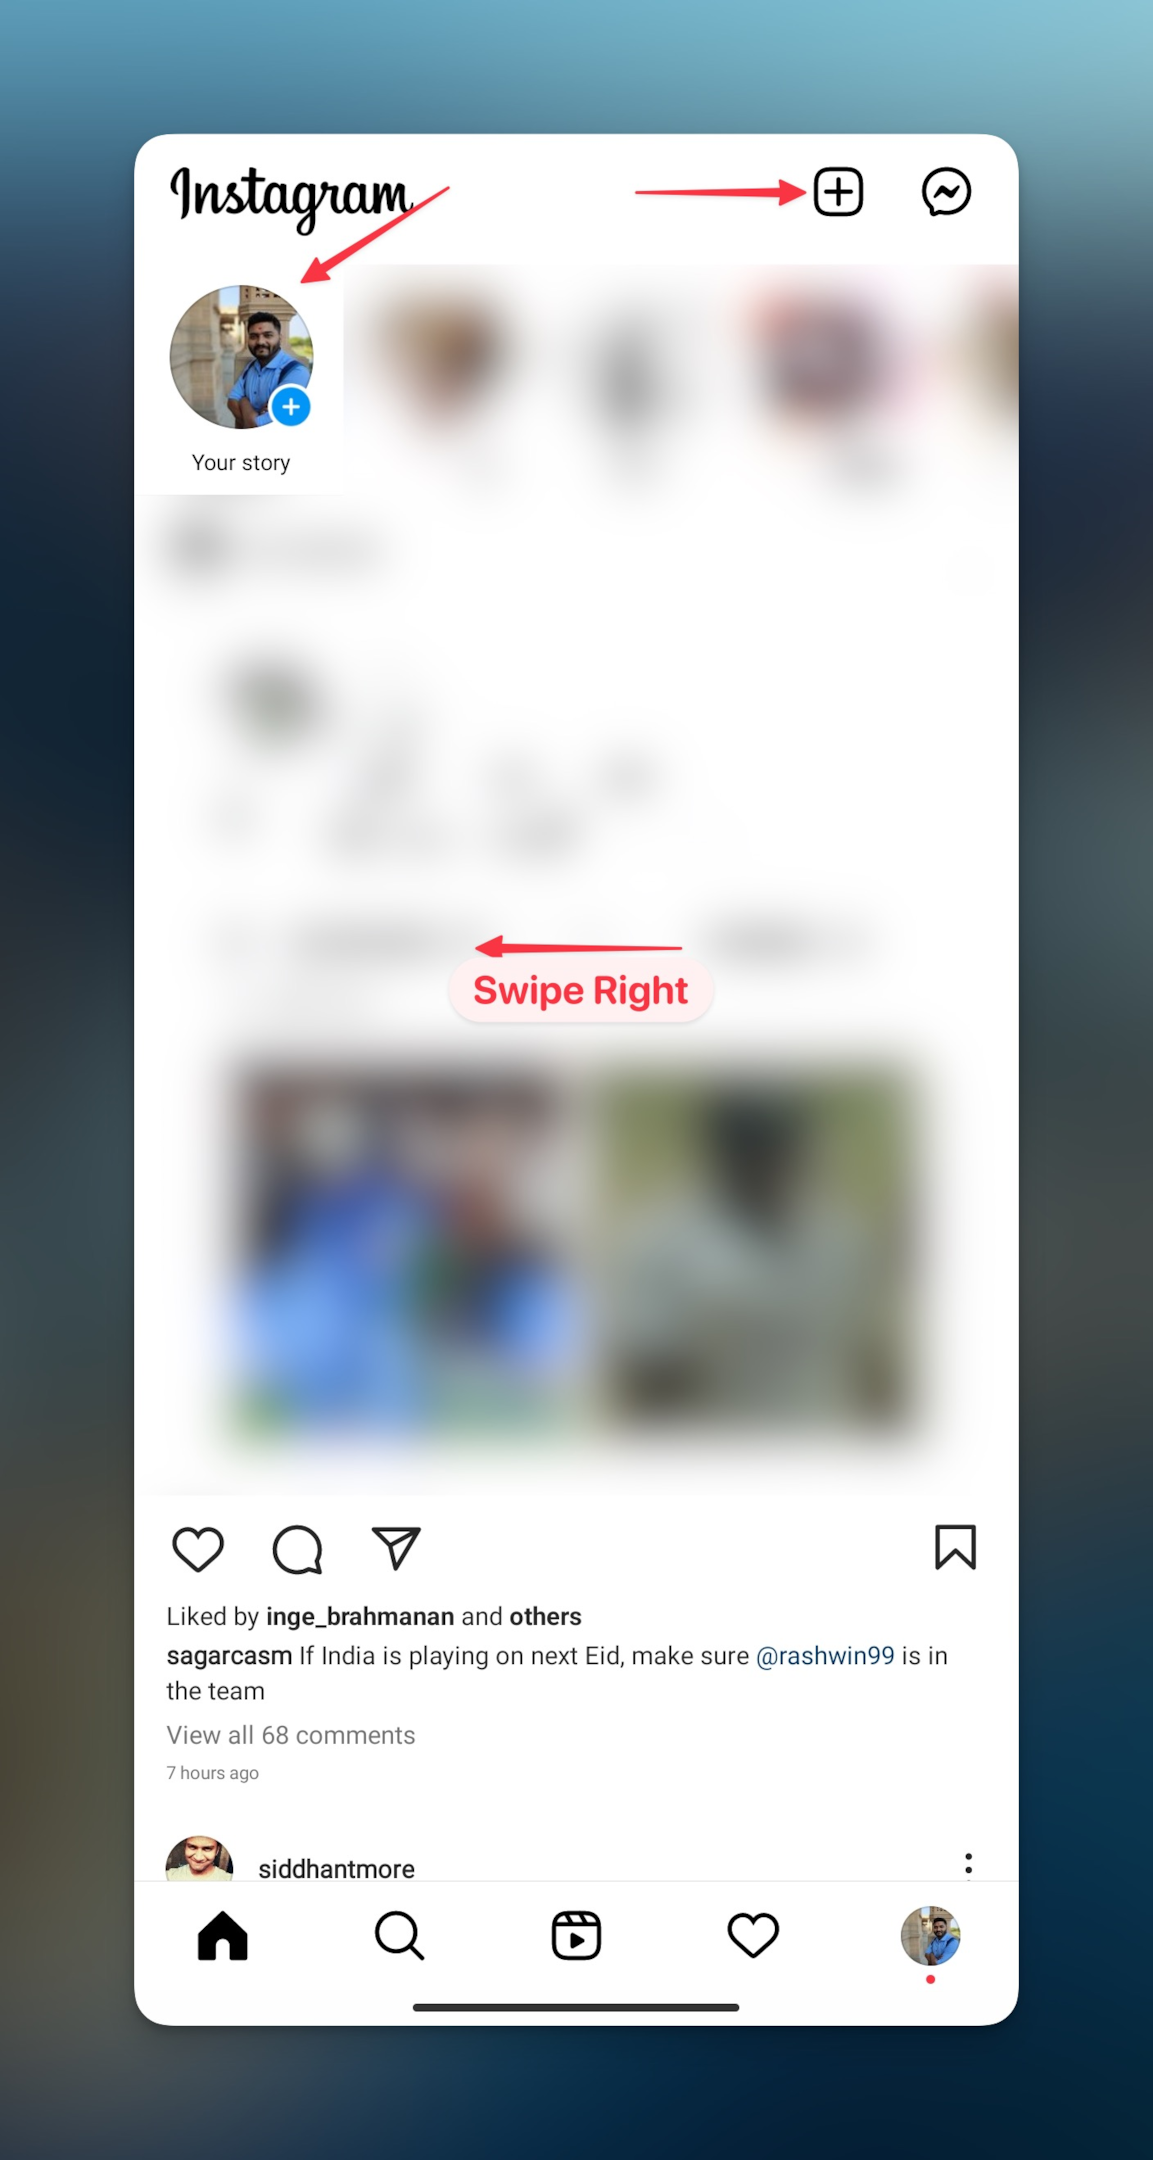 Remote.tools shows how to navigate to Instagram story screen from your home feed